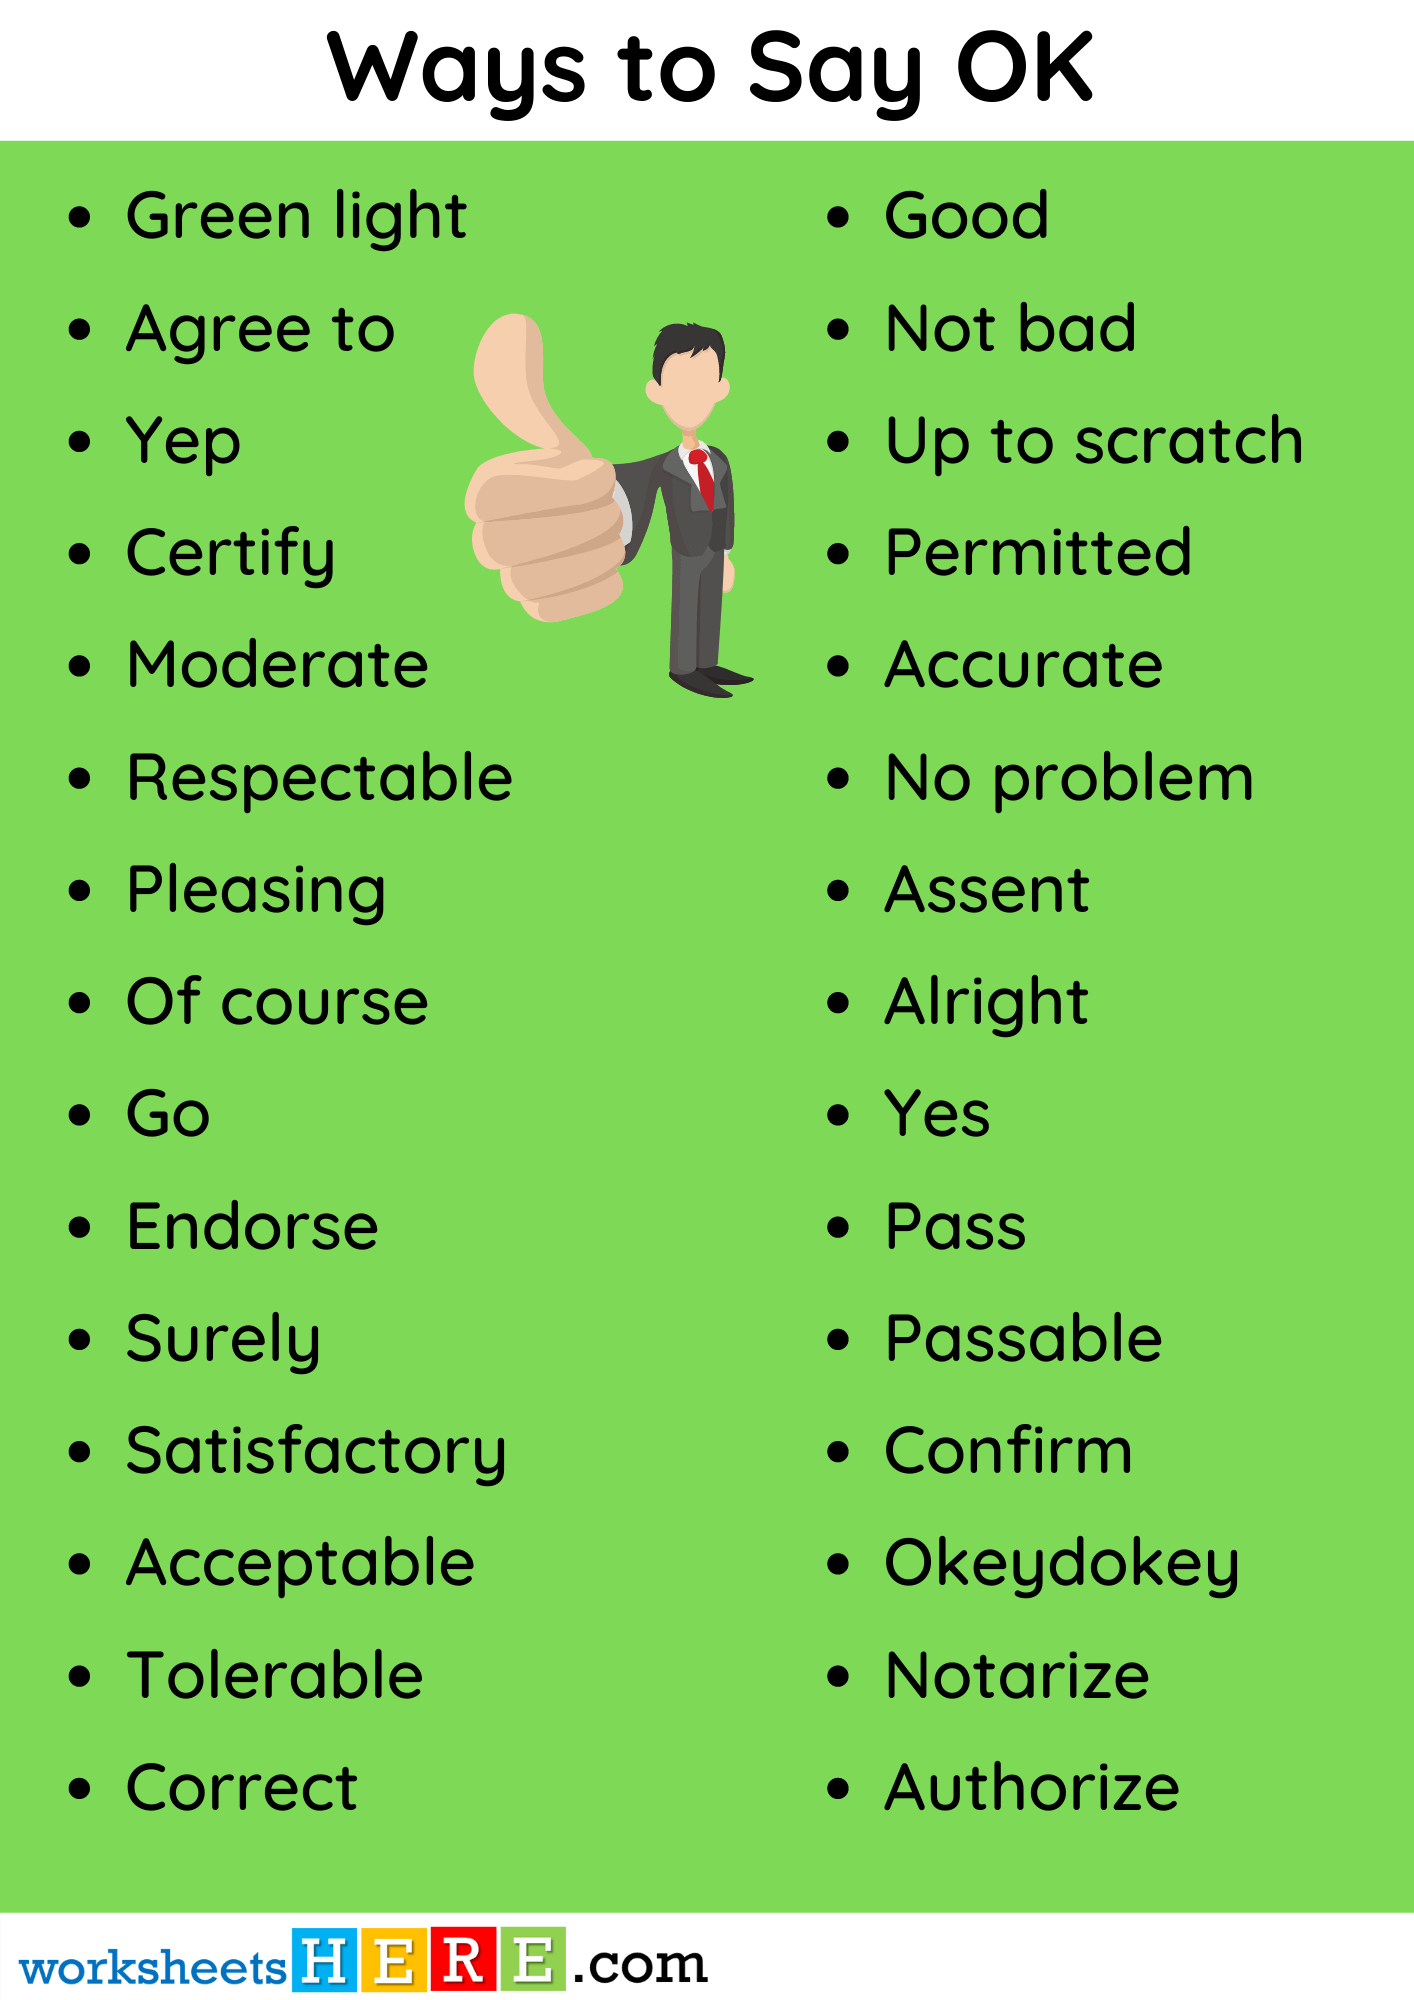 Ways to Say OK in Speaking PDF Worksheet For Students